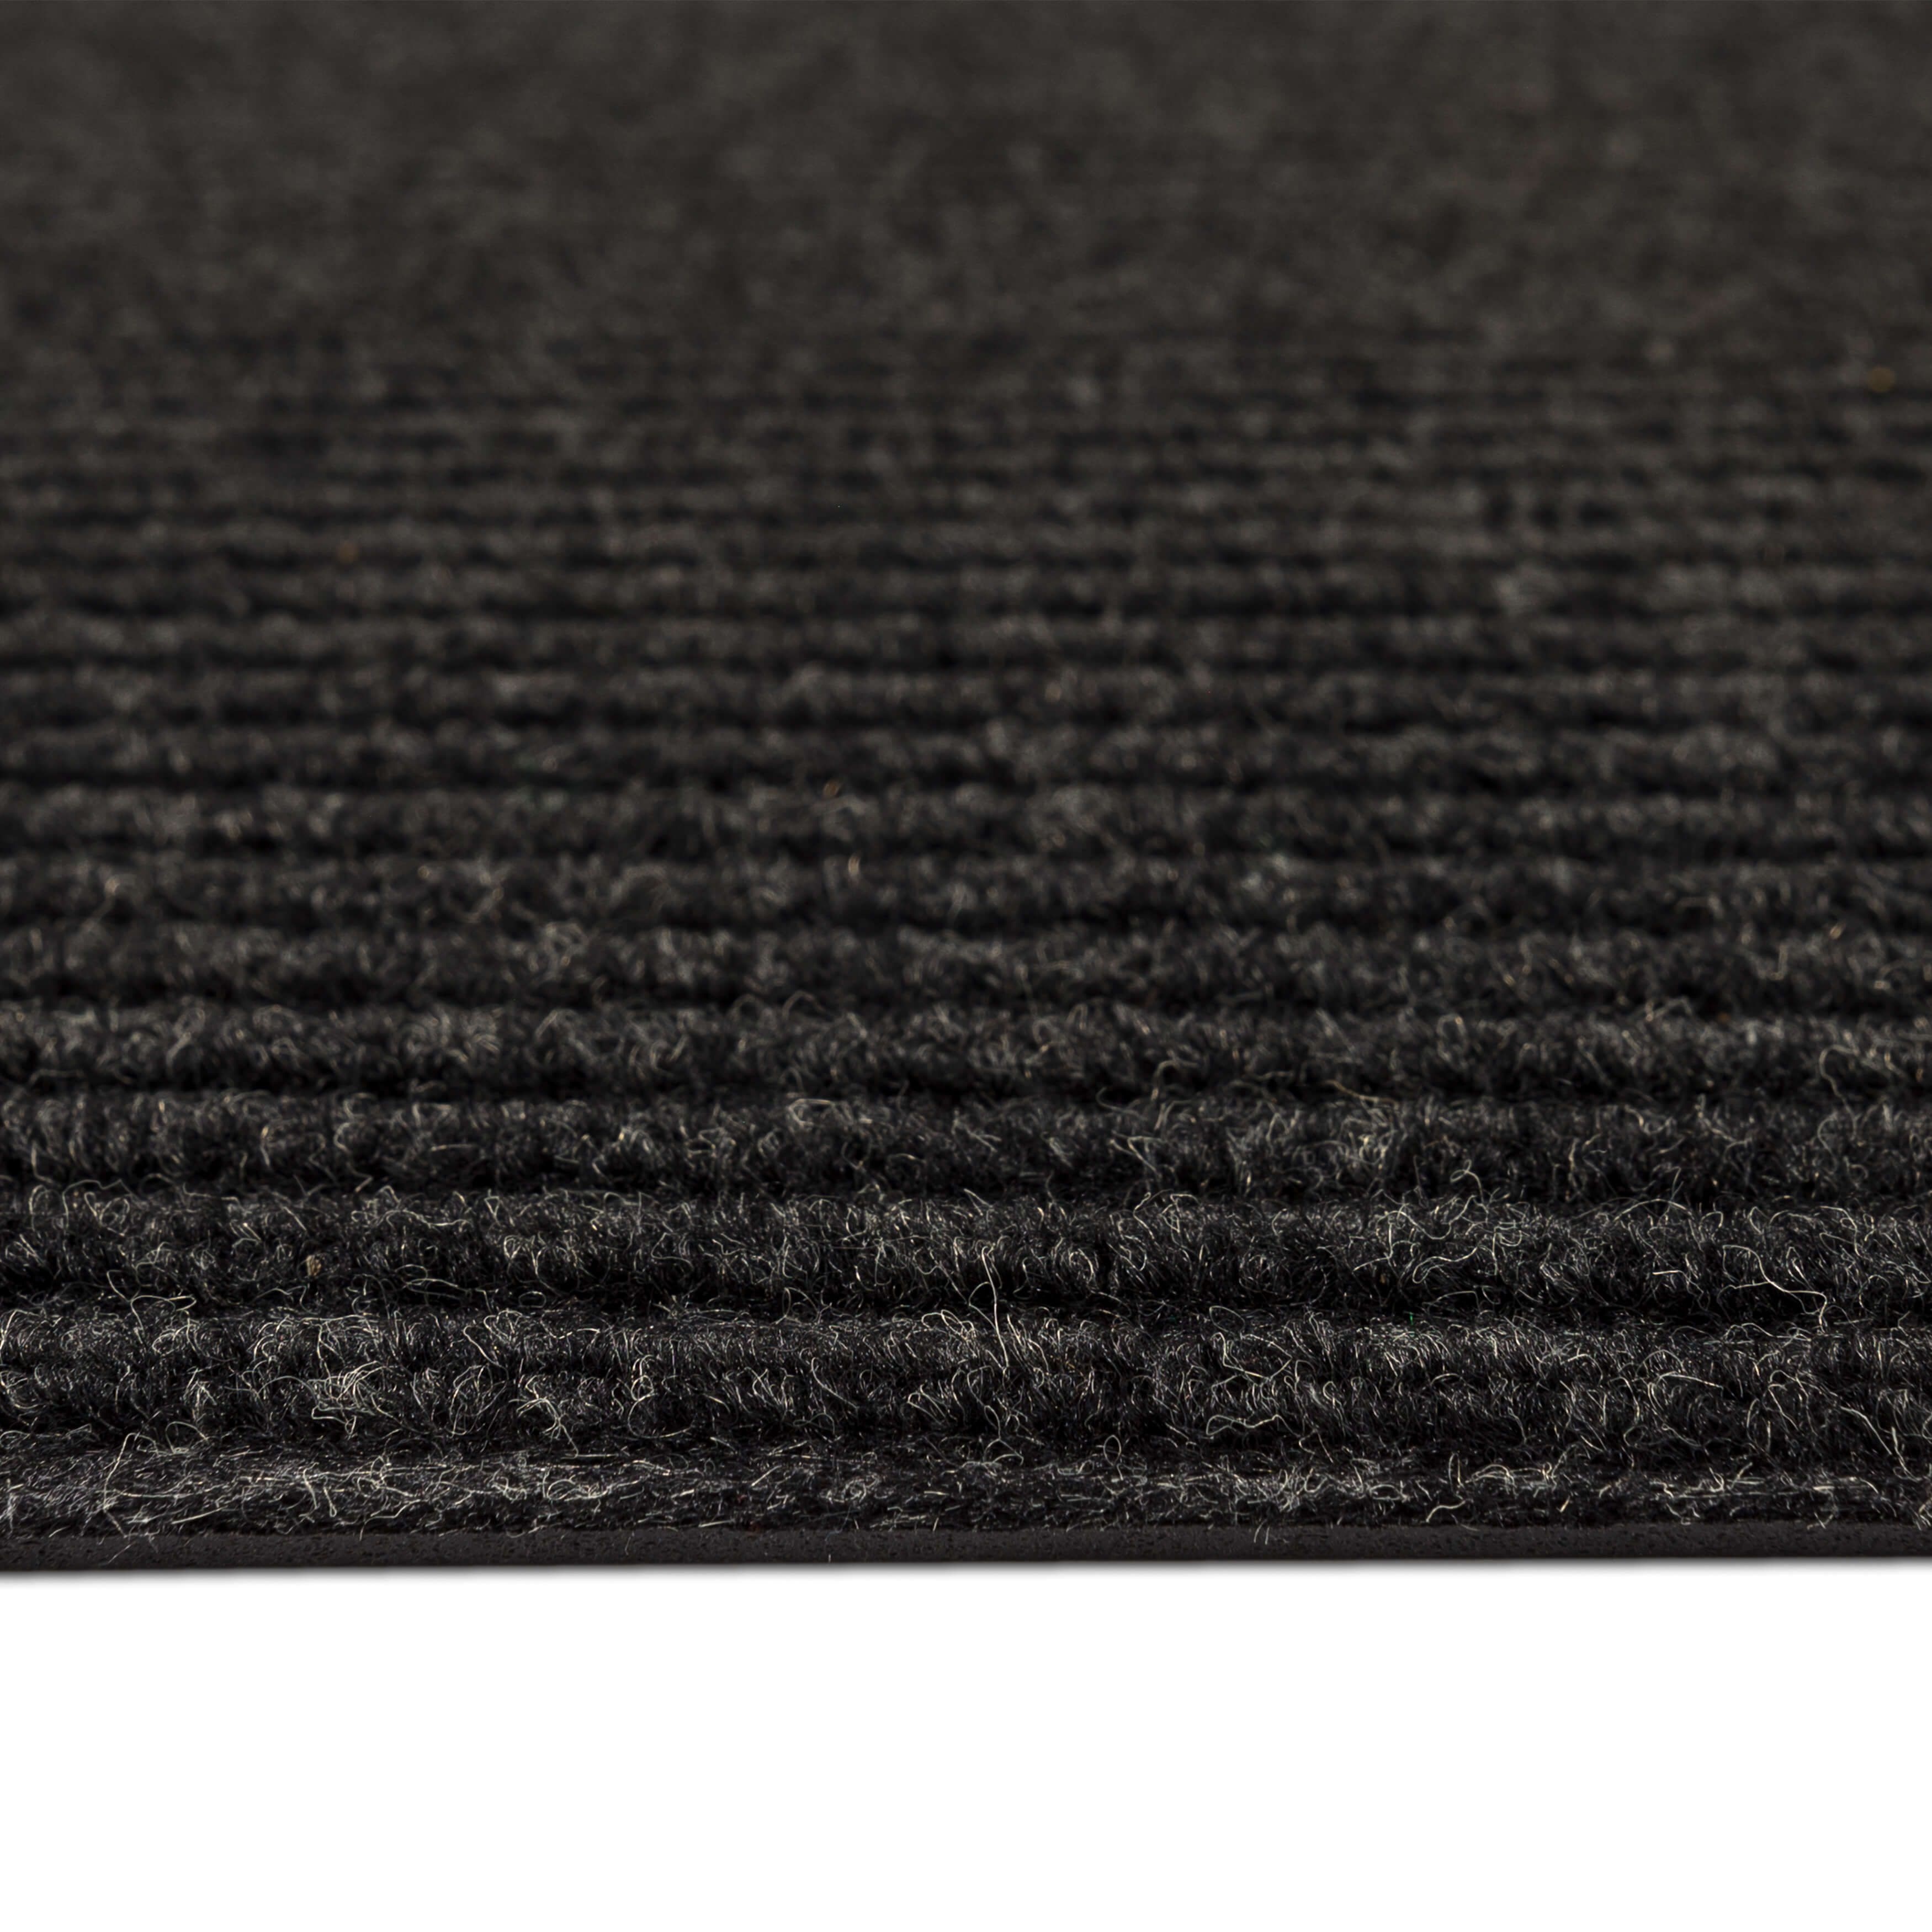 Mohawk Home Utility Floor Mat for Garage, Entryway, Porch, and Laundry Room  - On Sale - Bed Bath & Beyond - 35879287